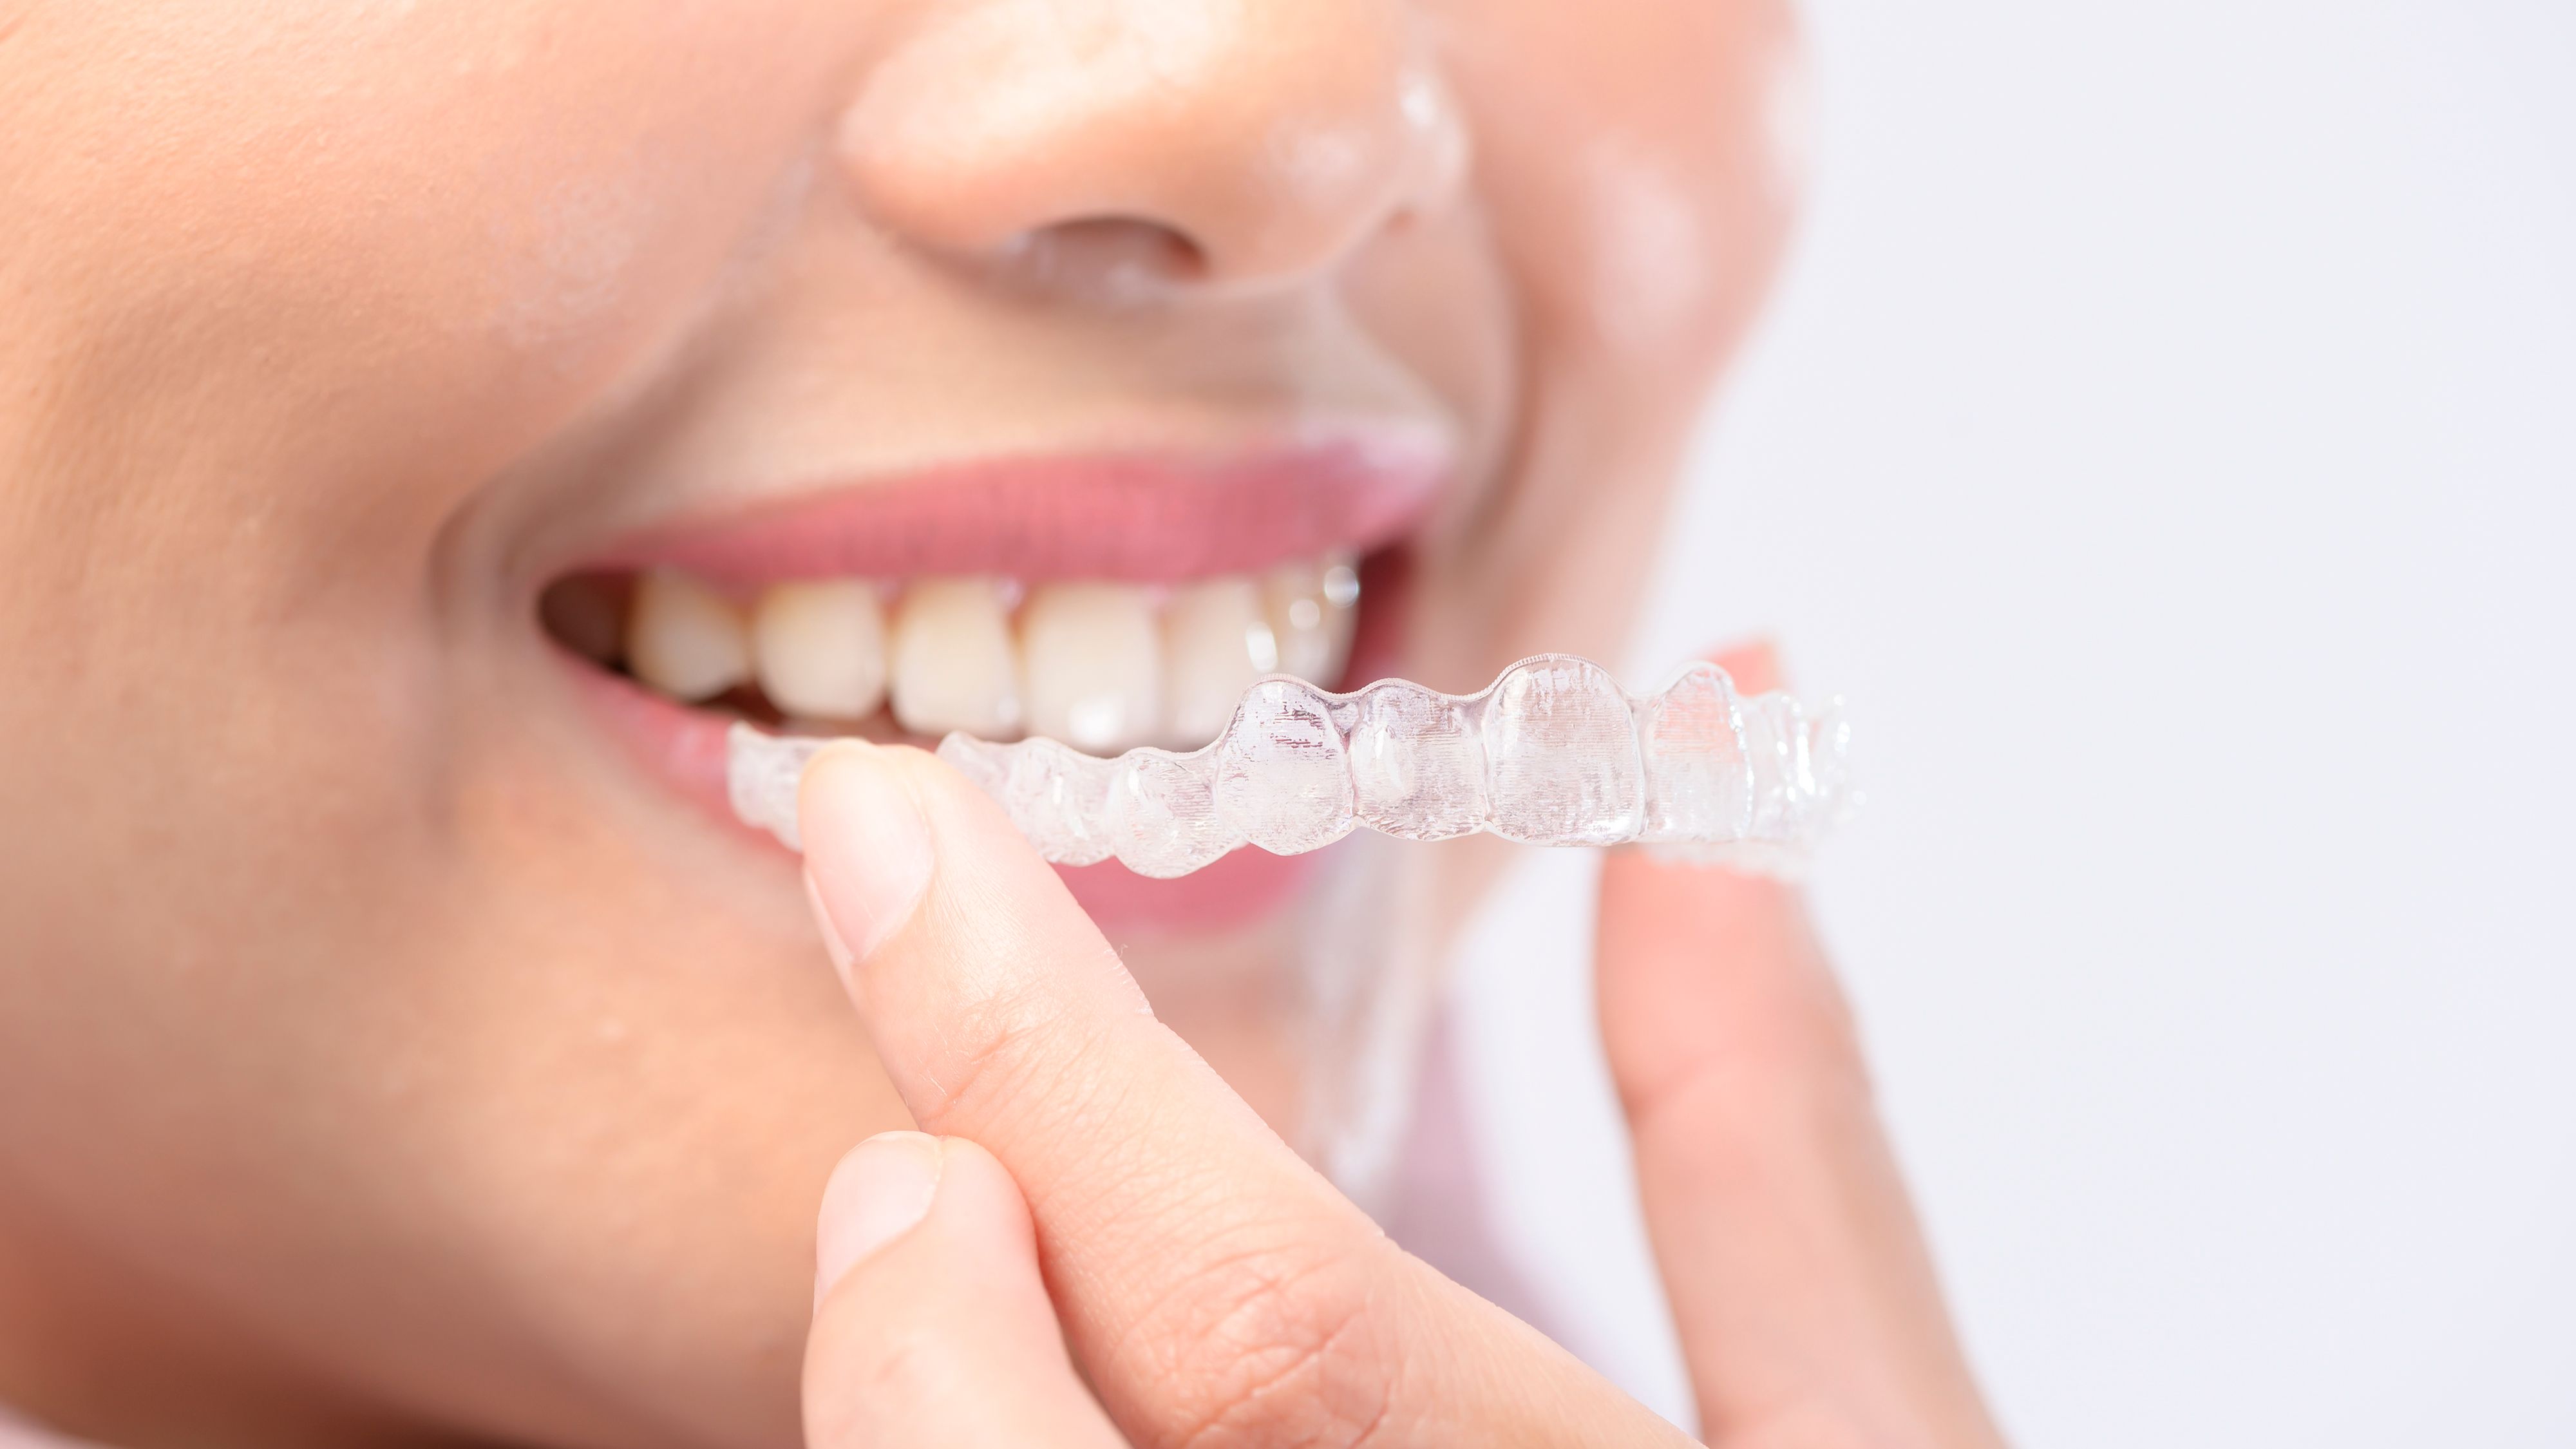 How to care for your Invisalign aligners?